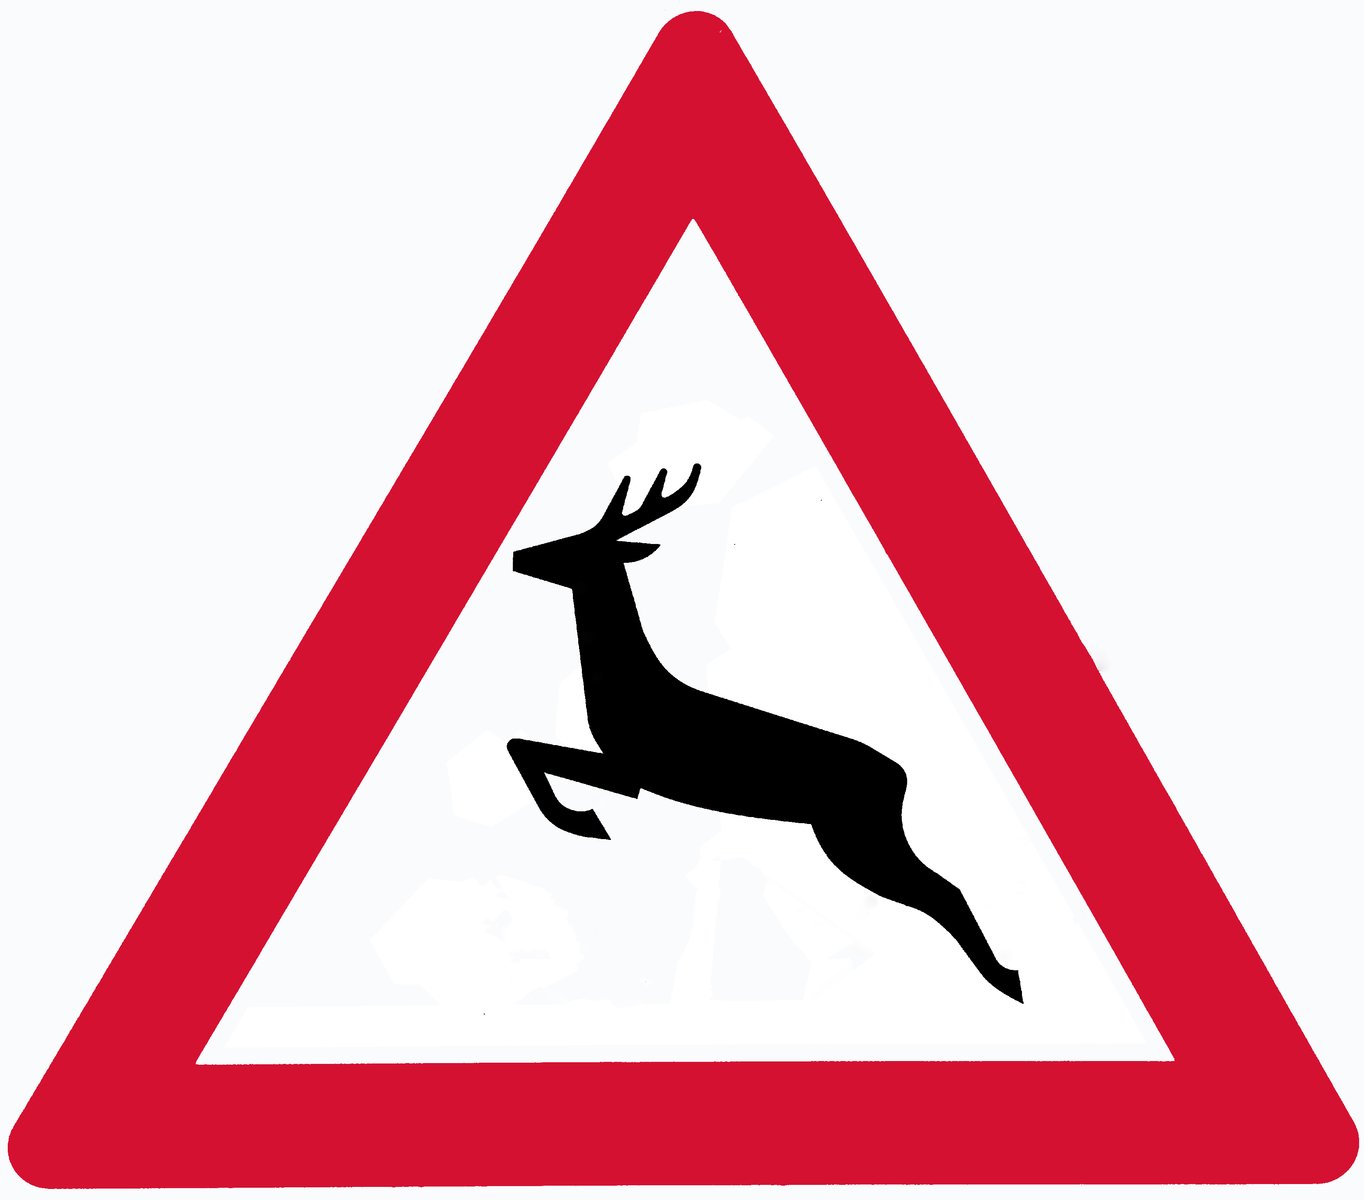 a black and white image of a deer crossing sign